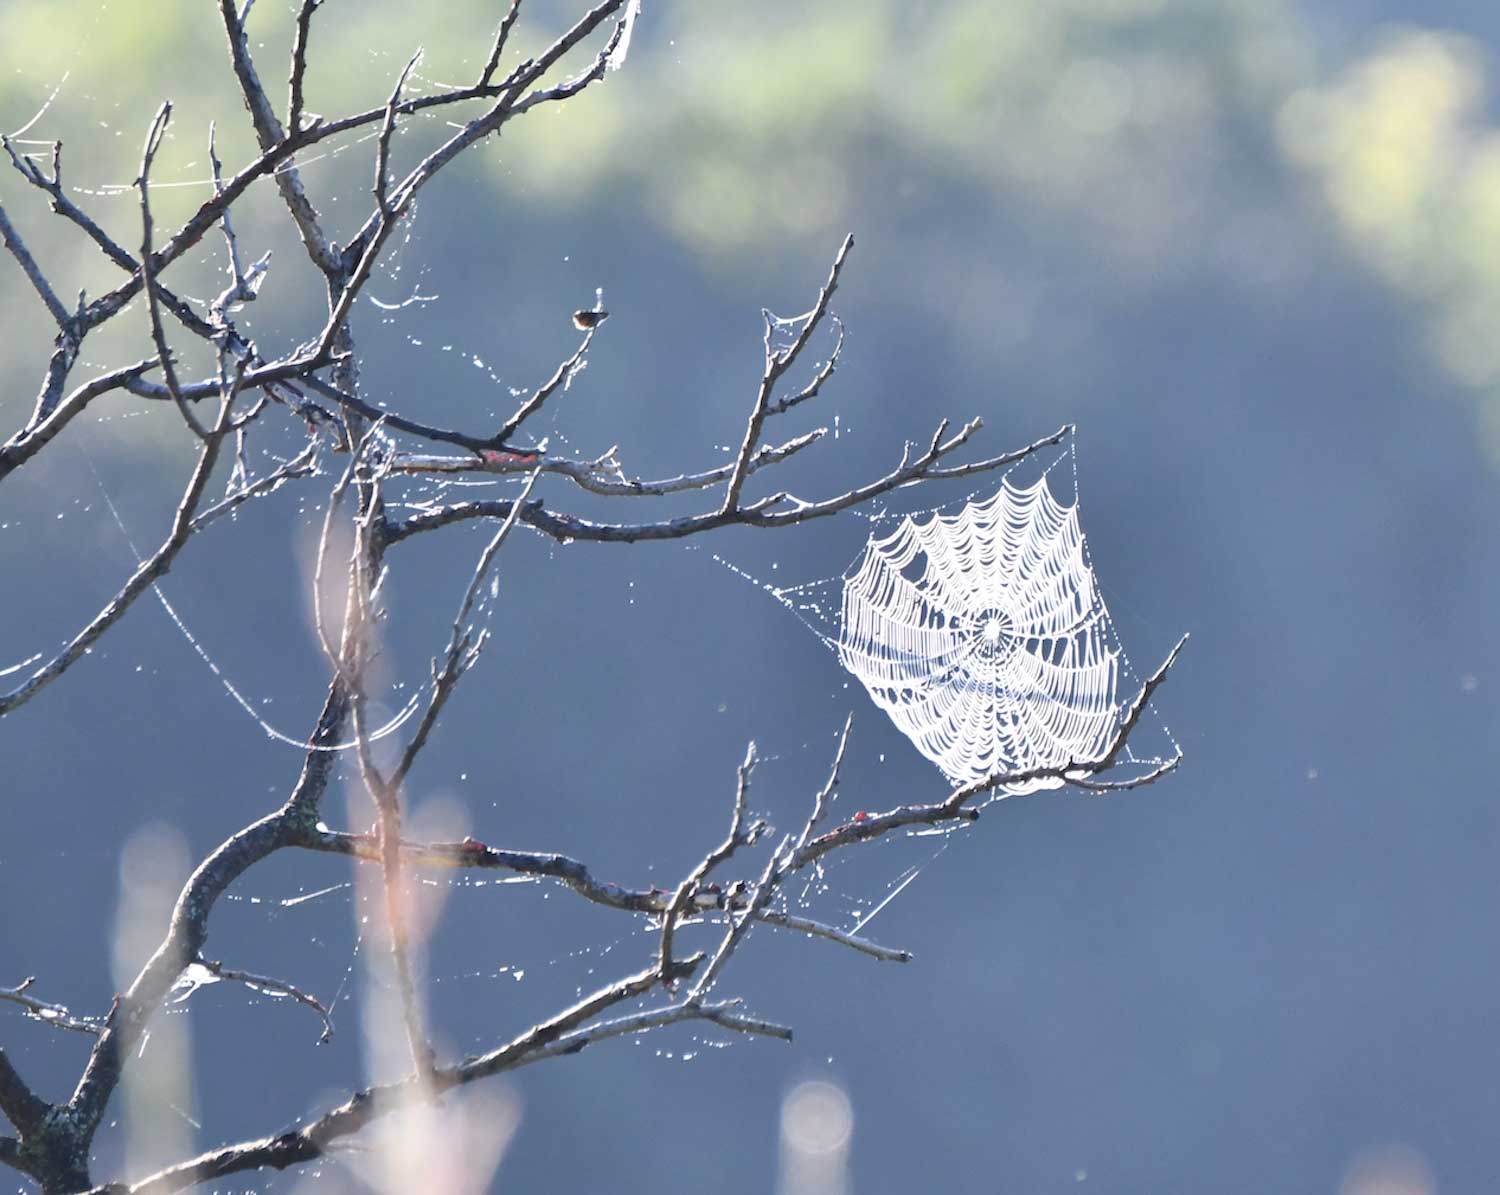 A spider web in a tree.